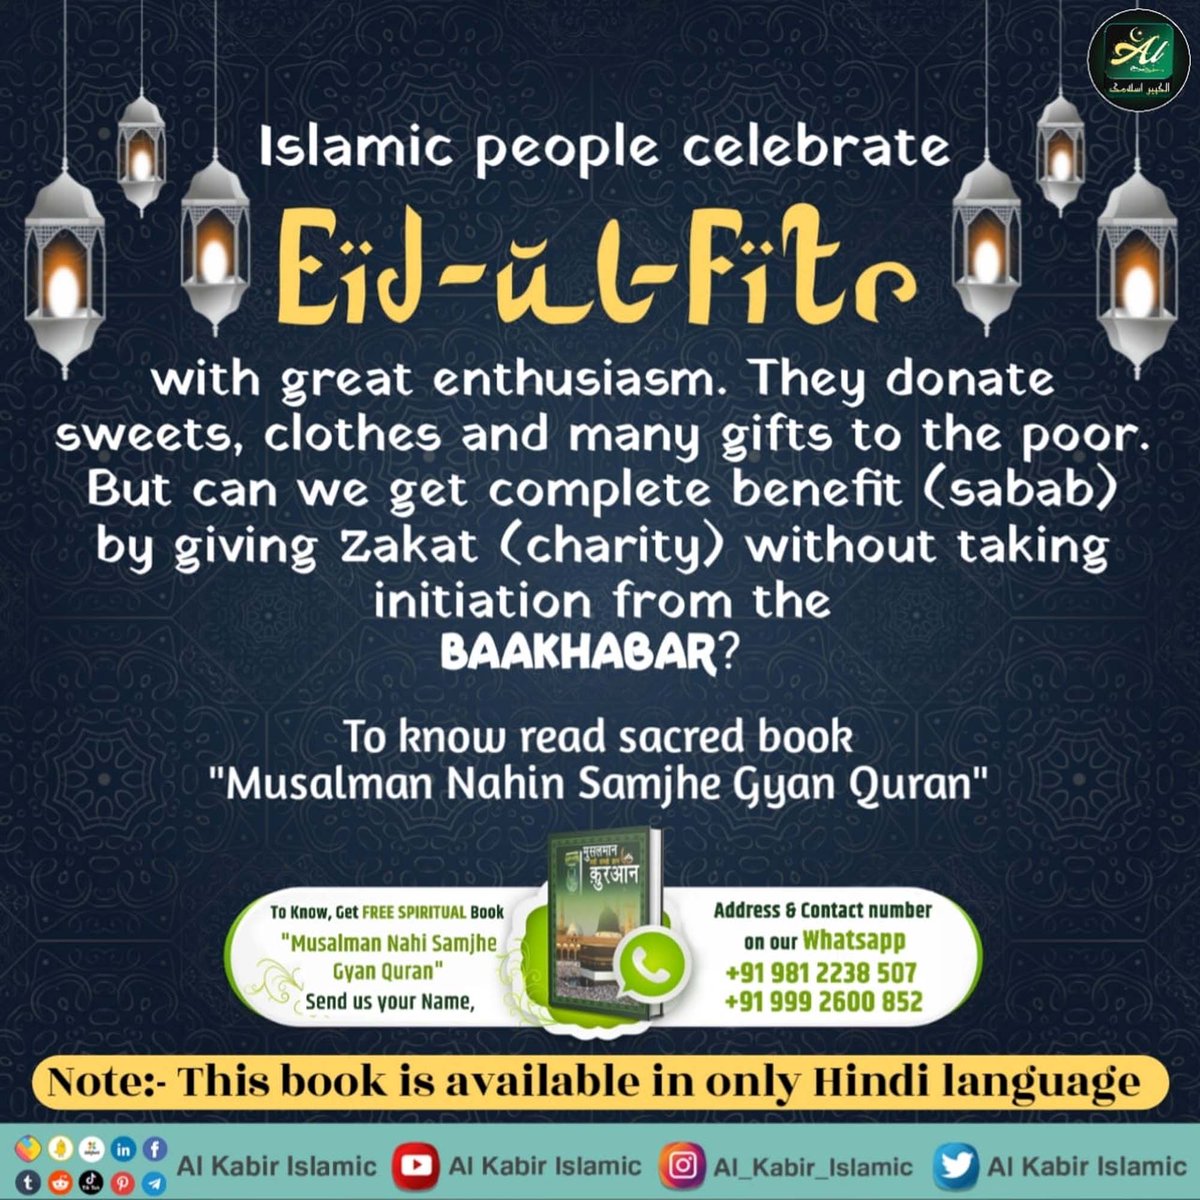 #अल्लाह_का_इल्म_बाखबर_से_पूछो Islamic people celebrate Eid-ul-fitr with great enthusiasm. They donate sweets, clothes and many gifts to the poor. But can we get complete benefit(sabab) by giving zakat (charity) without taking initiation from the Baakhabar ? Santrampal mahraj ji